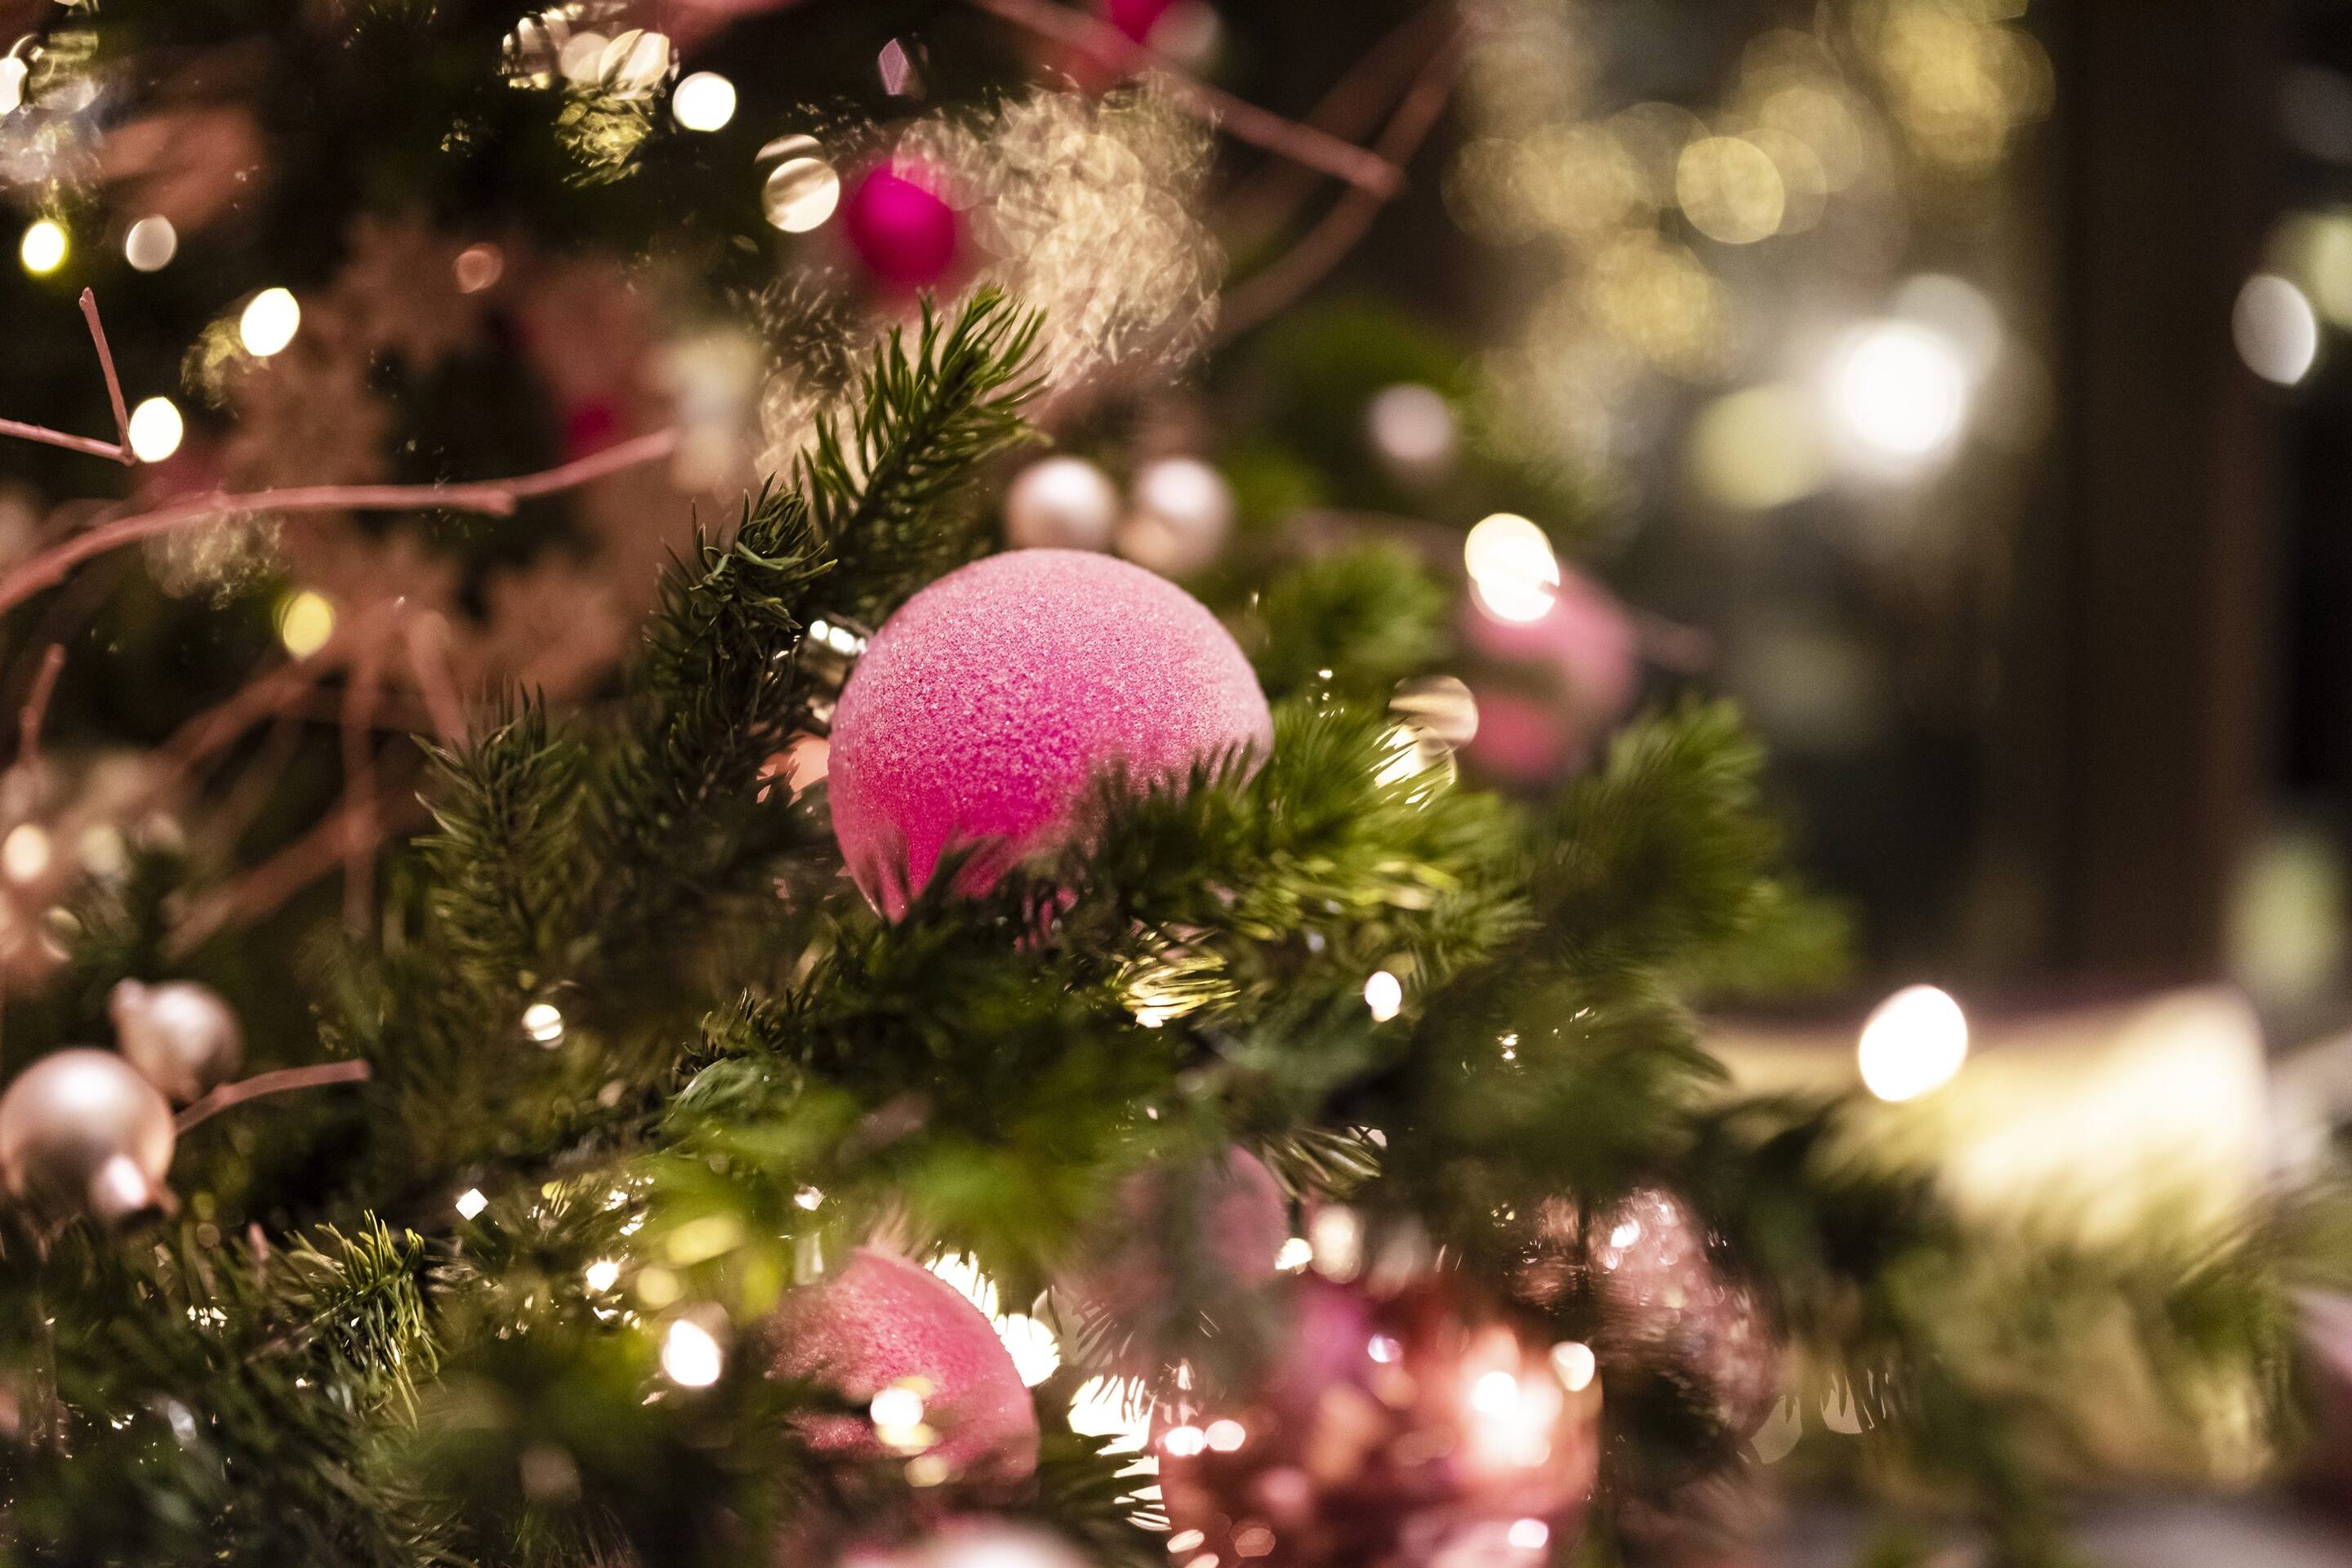 Pink, festive bauble on Christmas tree